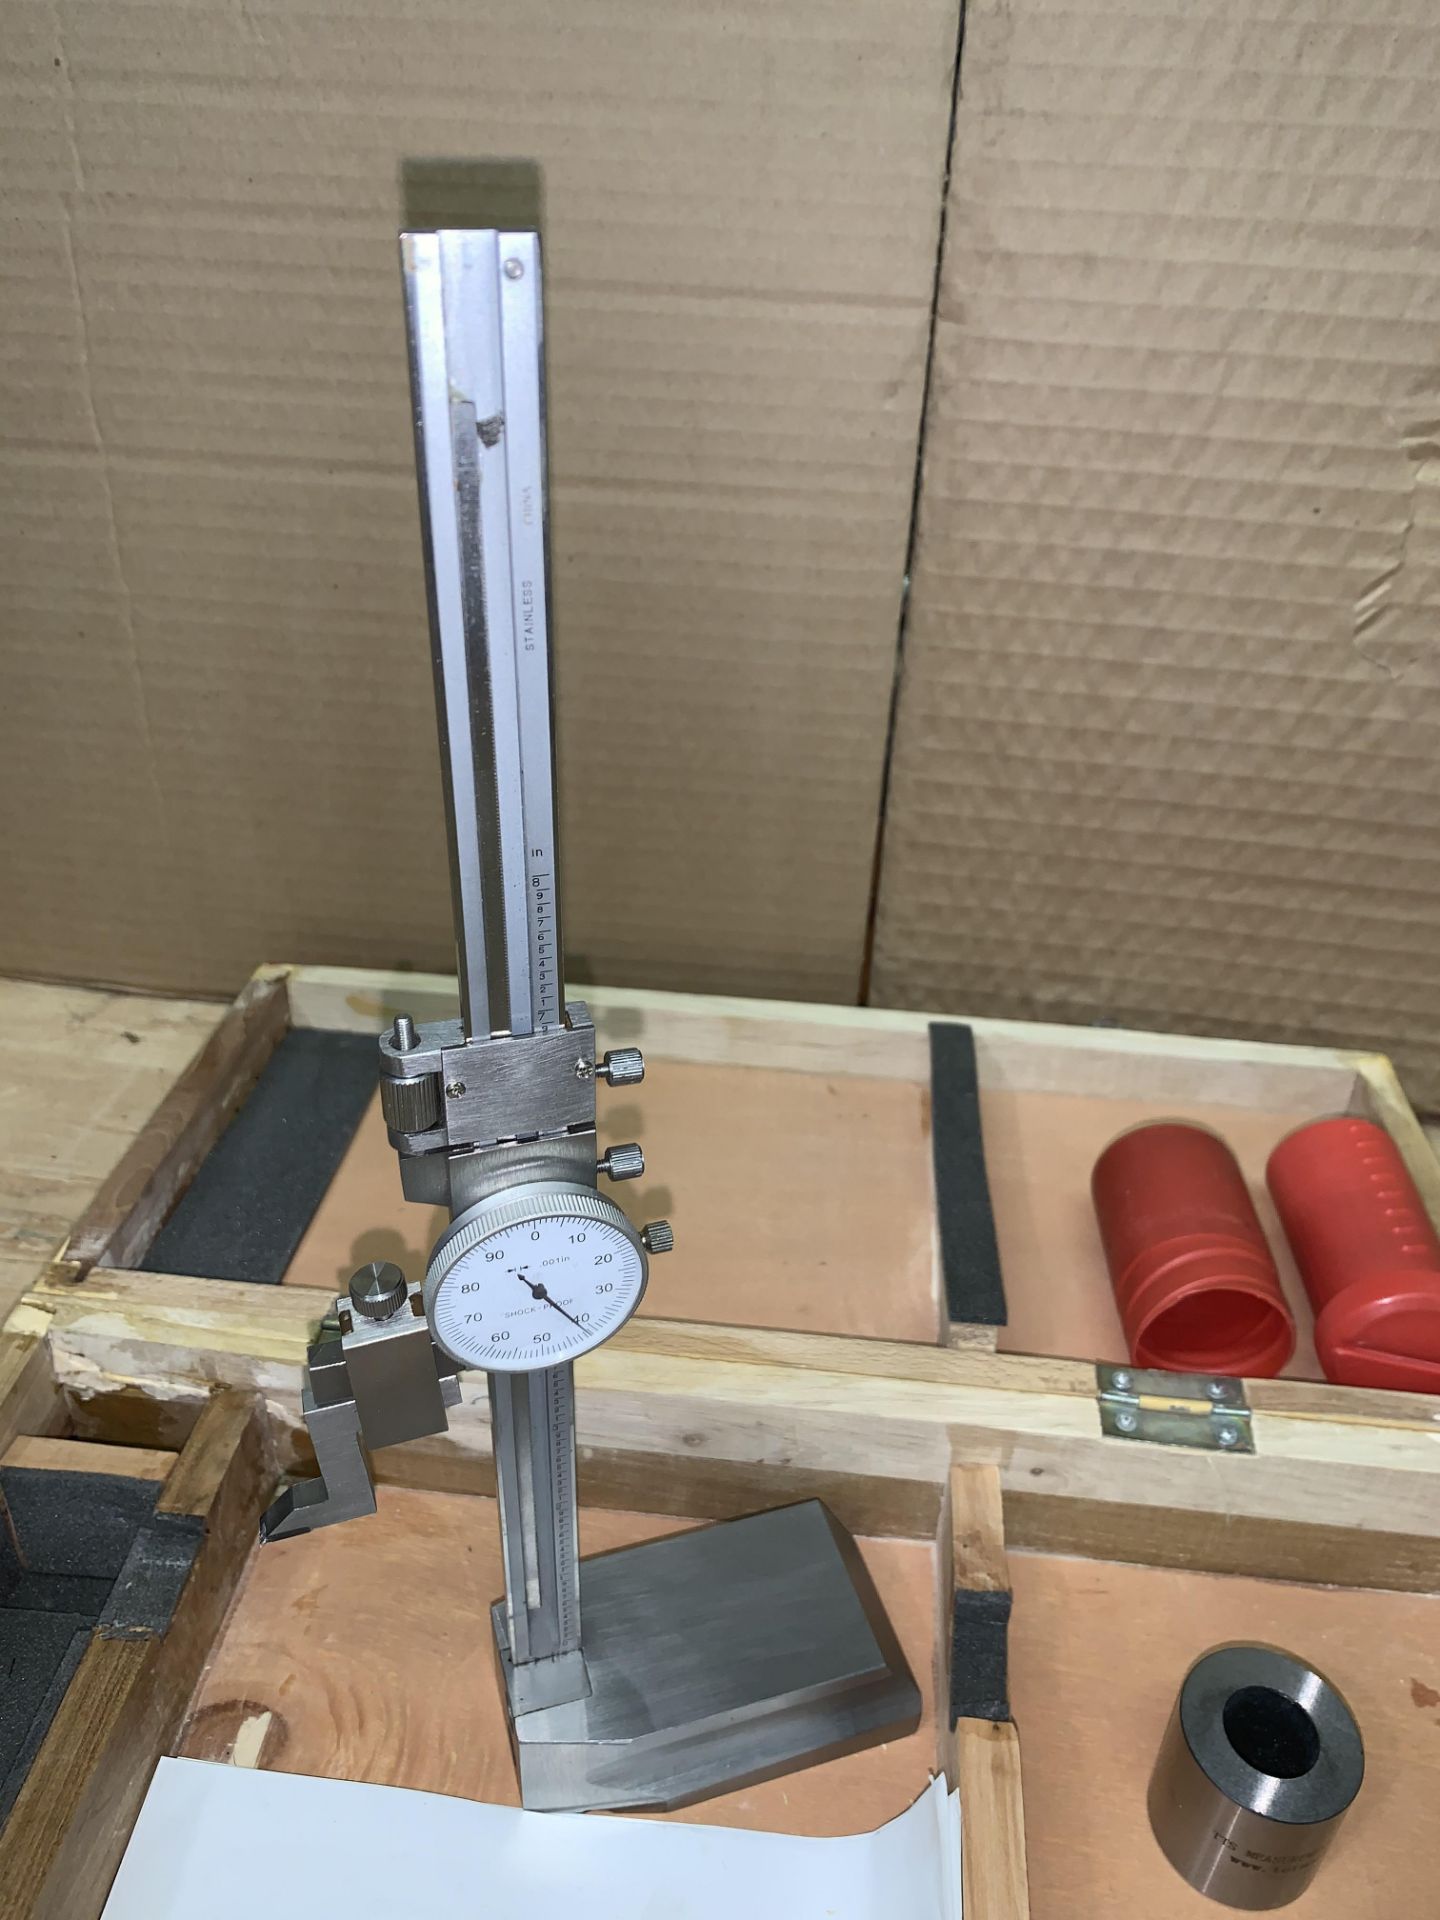 8" Single Column Dial Height Gauge with Tormach 1.5" Calibration Fixture - Image 2 of 3